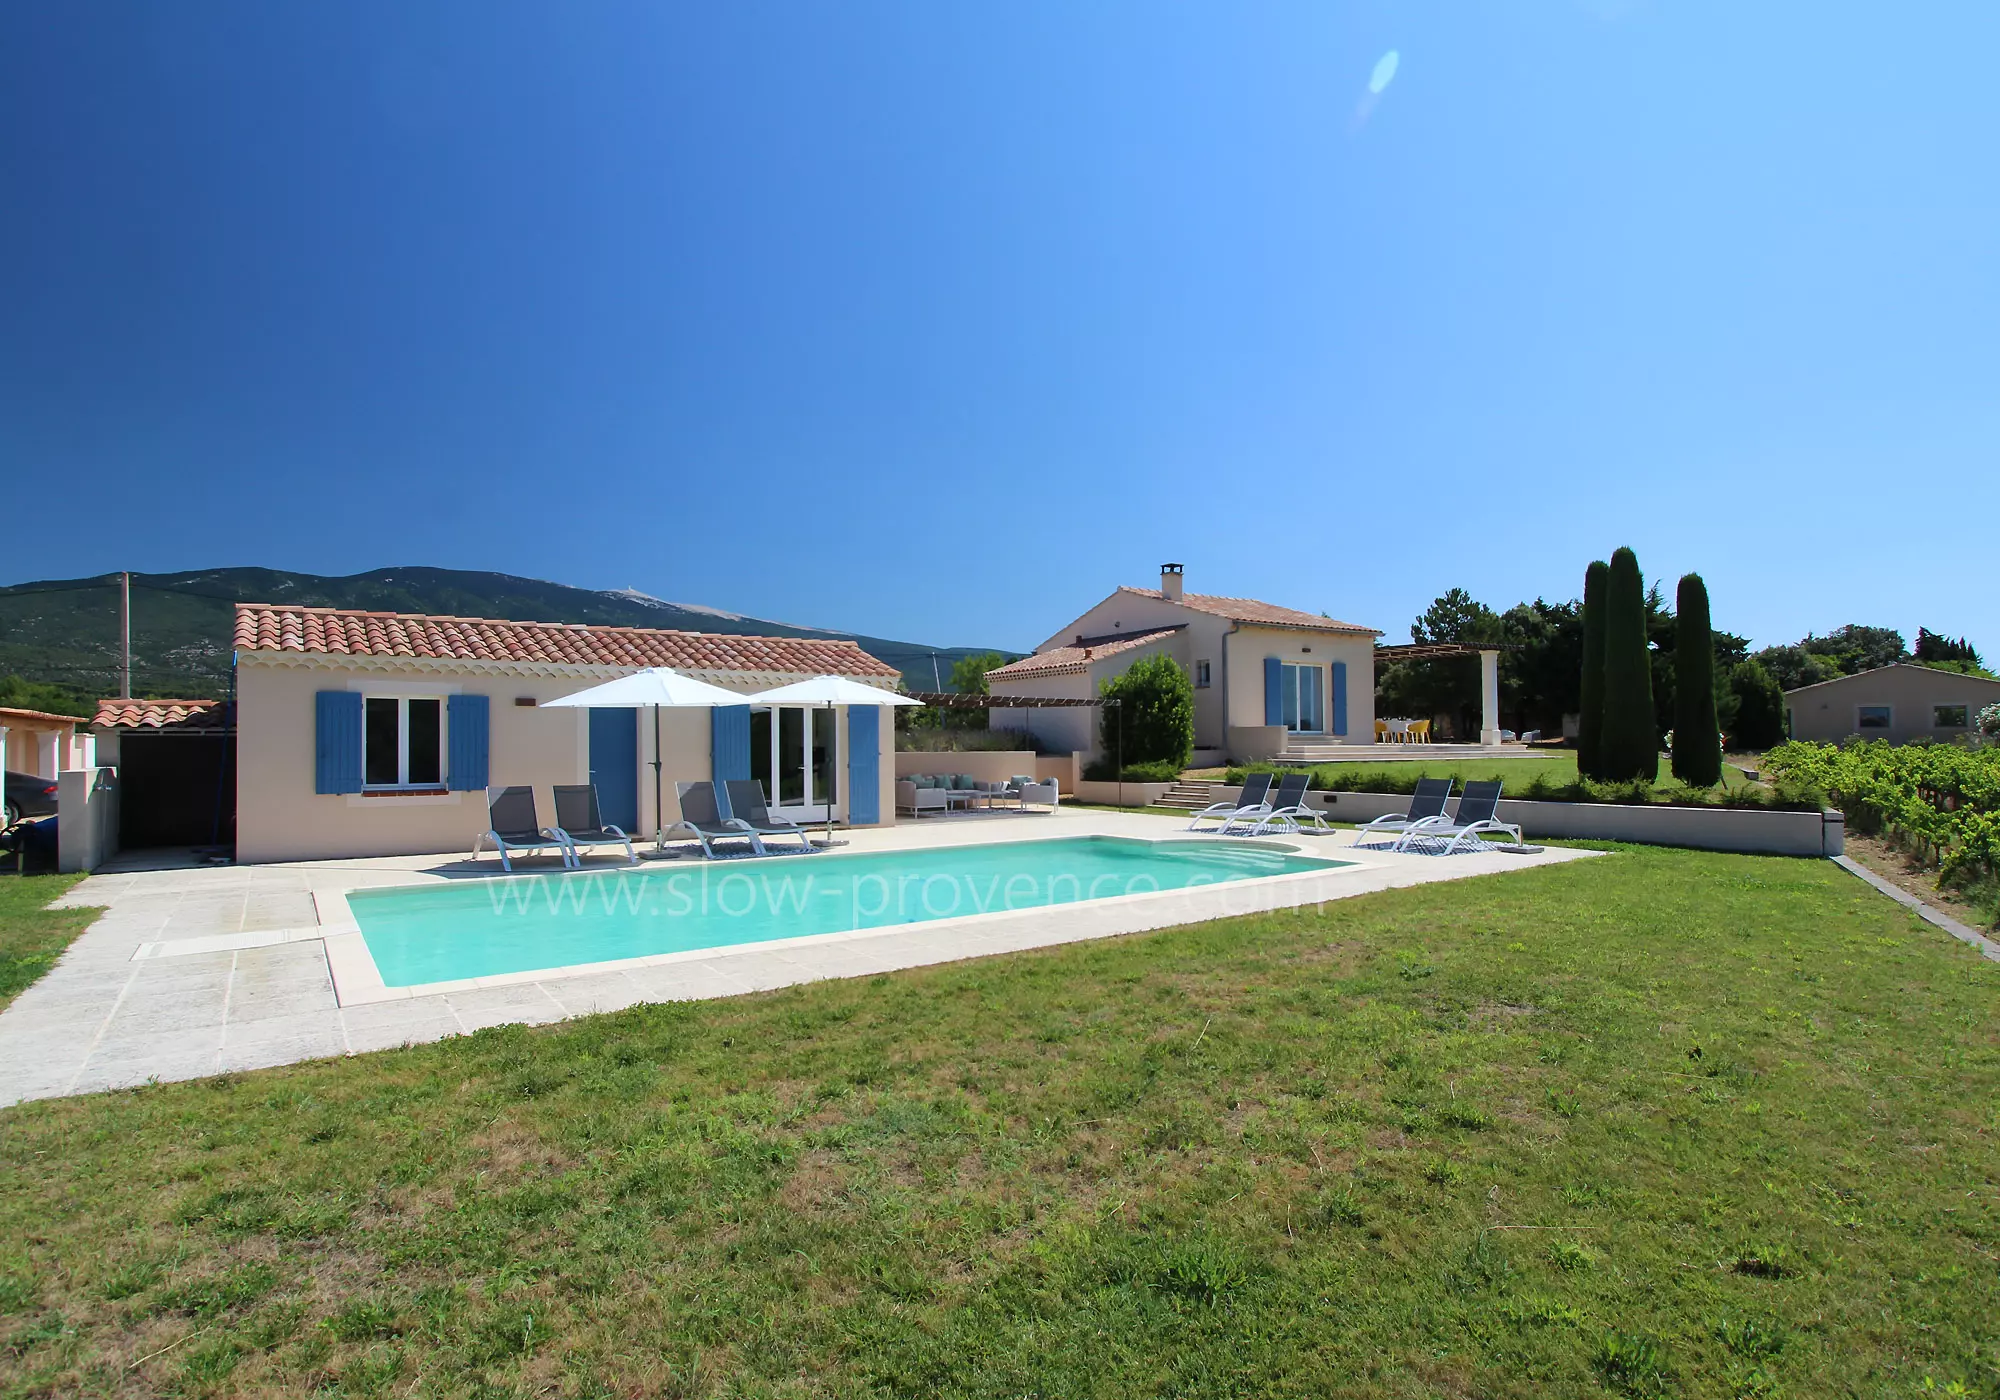 A spacious 5-bedroom villa with Mont Ventoux in the background